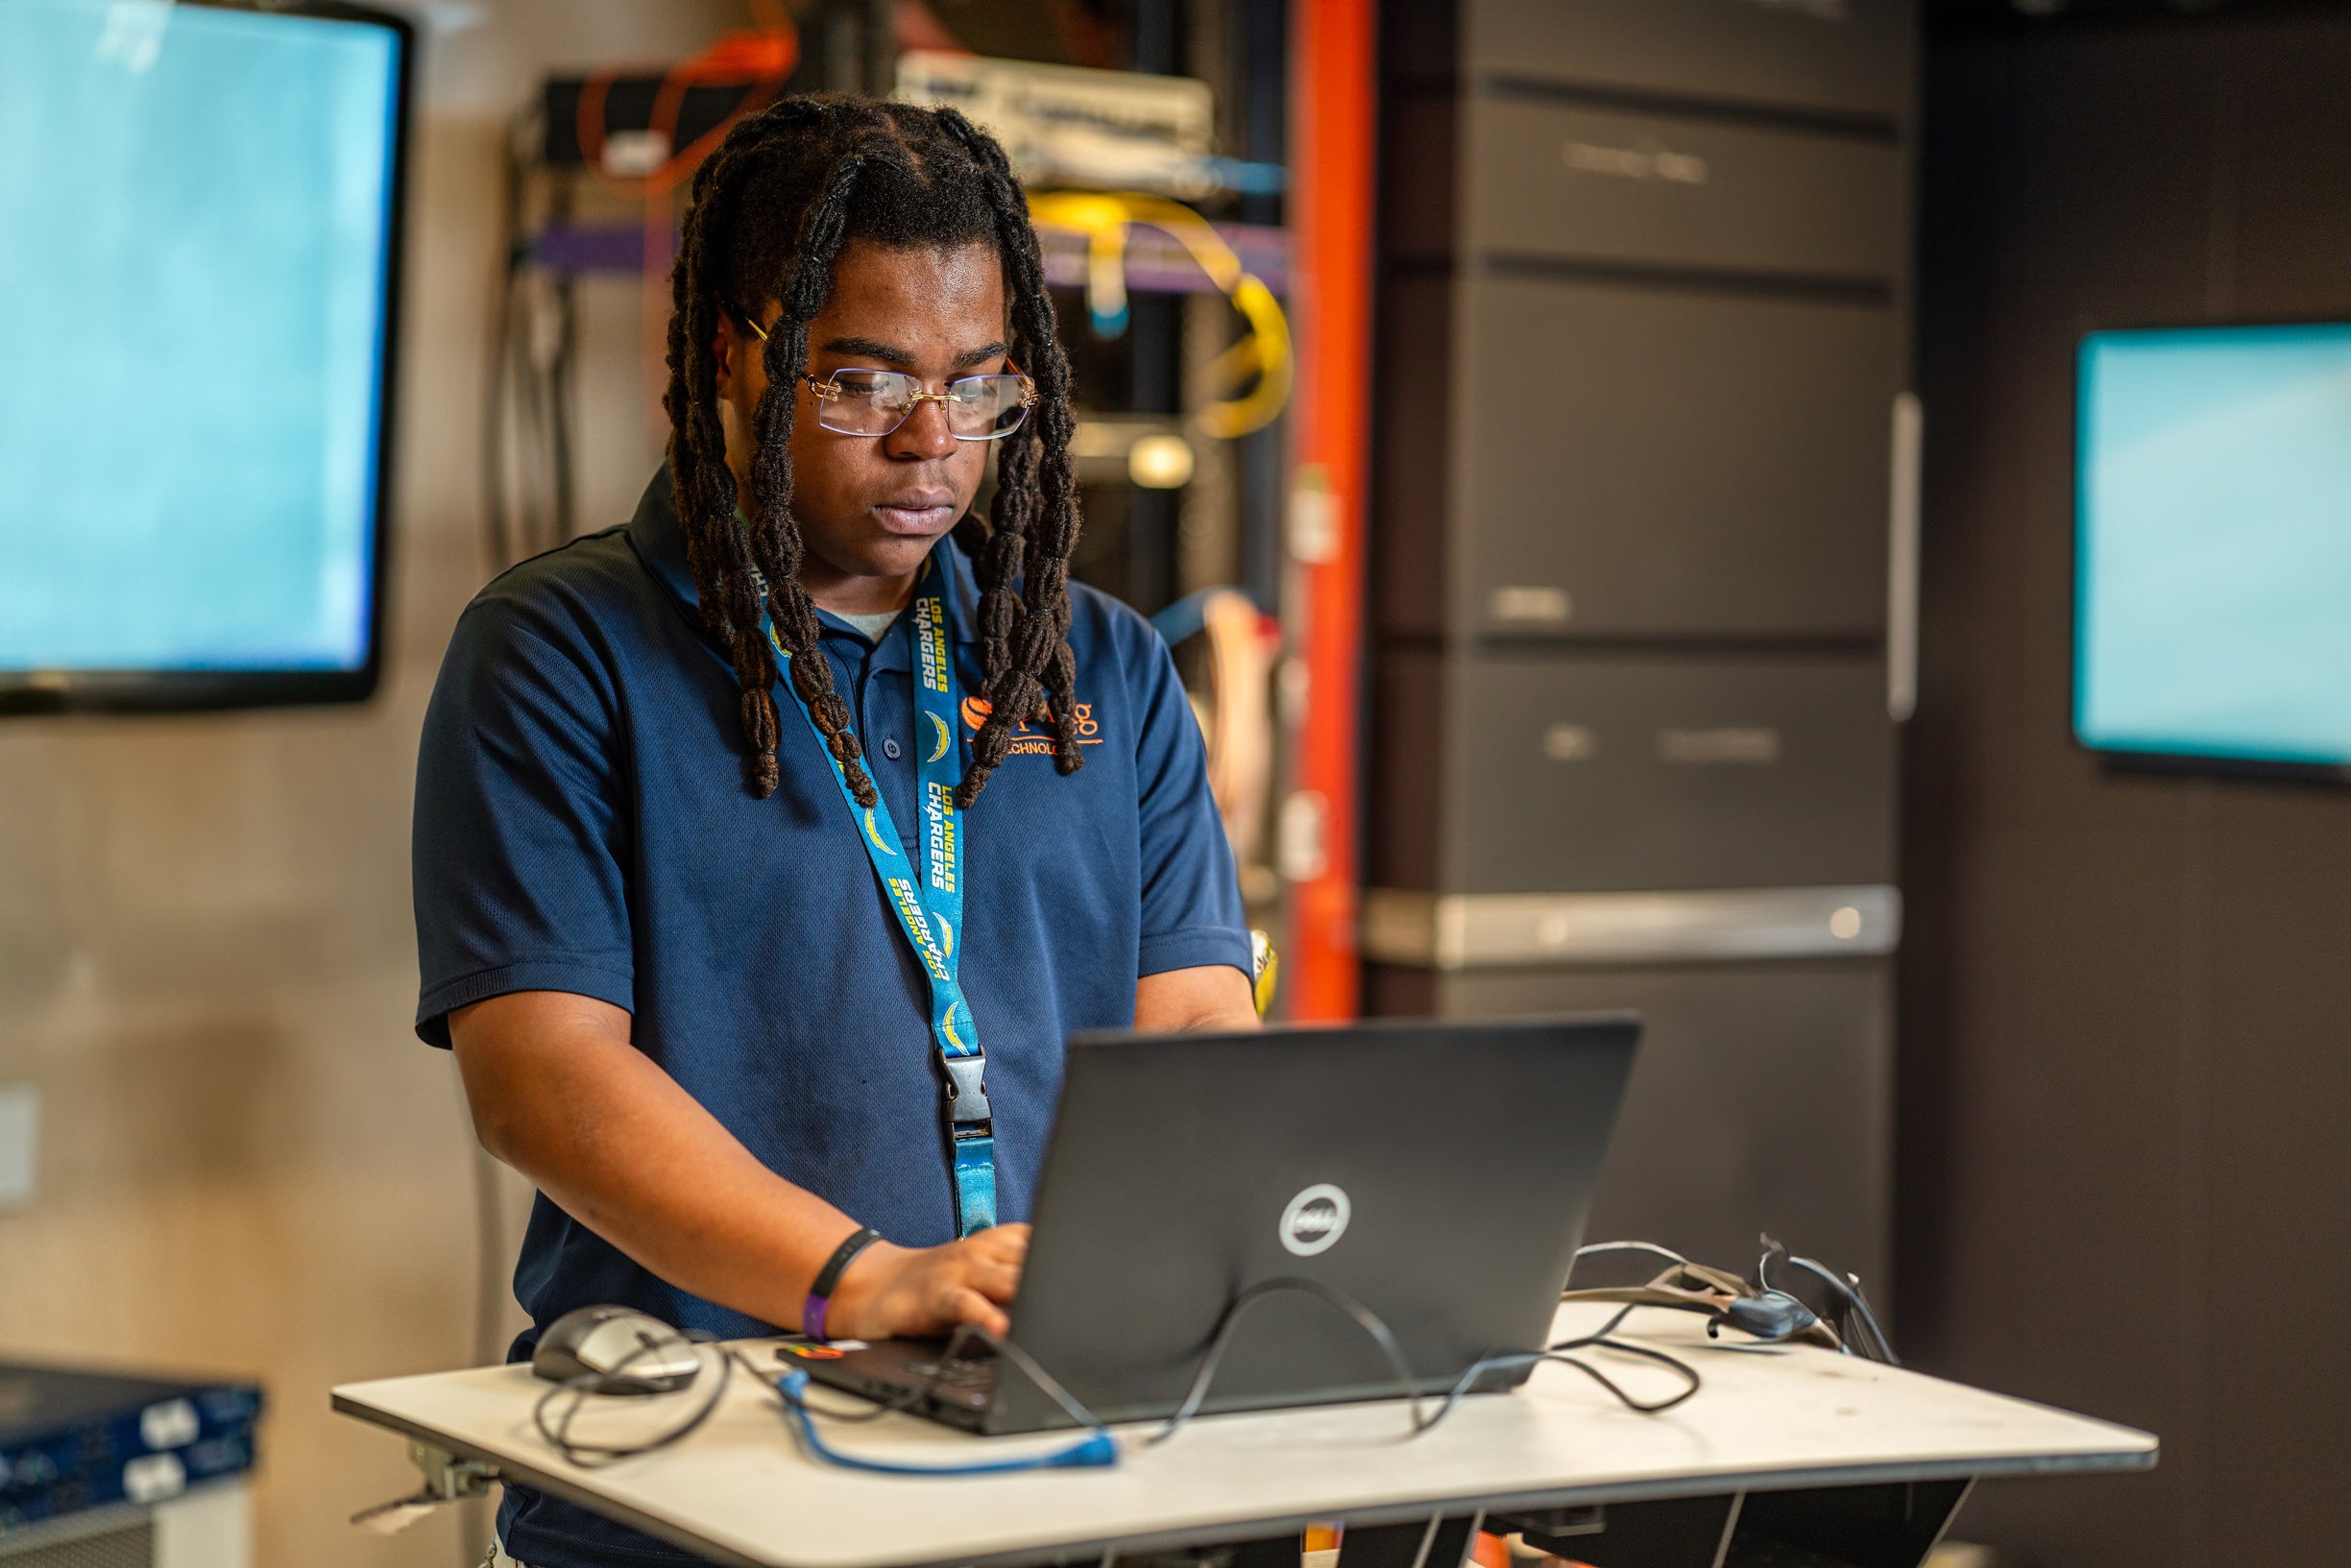 ​ ​ Michael King is an audio/video technician in Spring ISD. He got his start on his career path thanks in part to a program offered when he was in high school in the district.